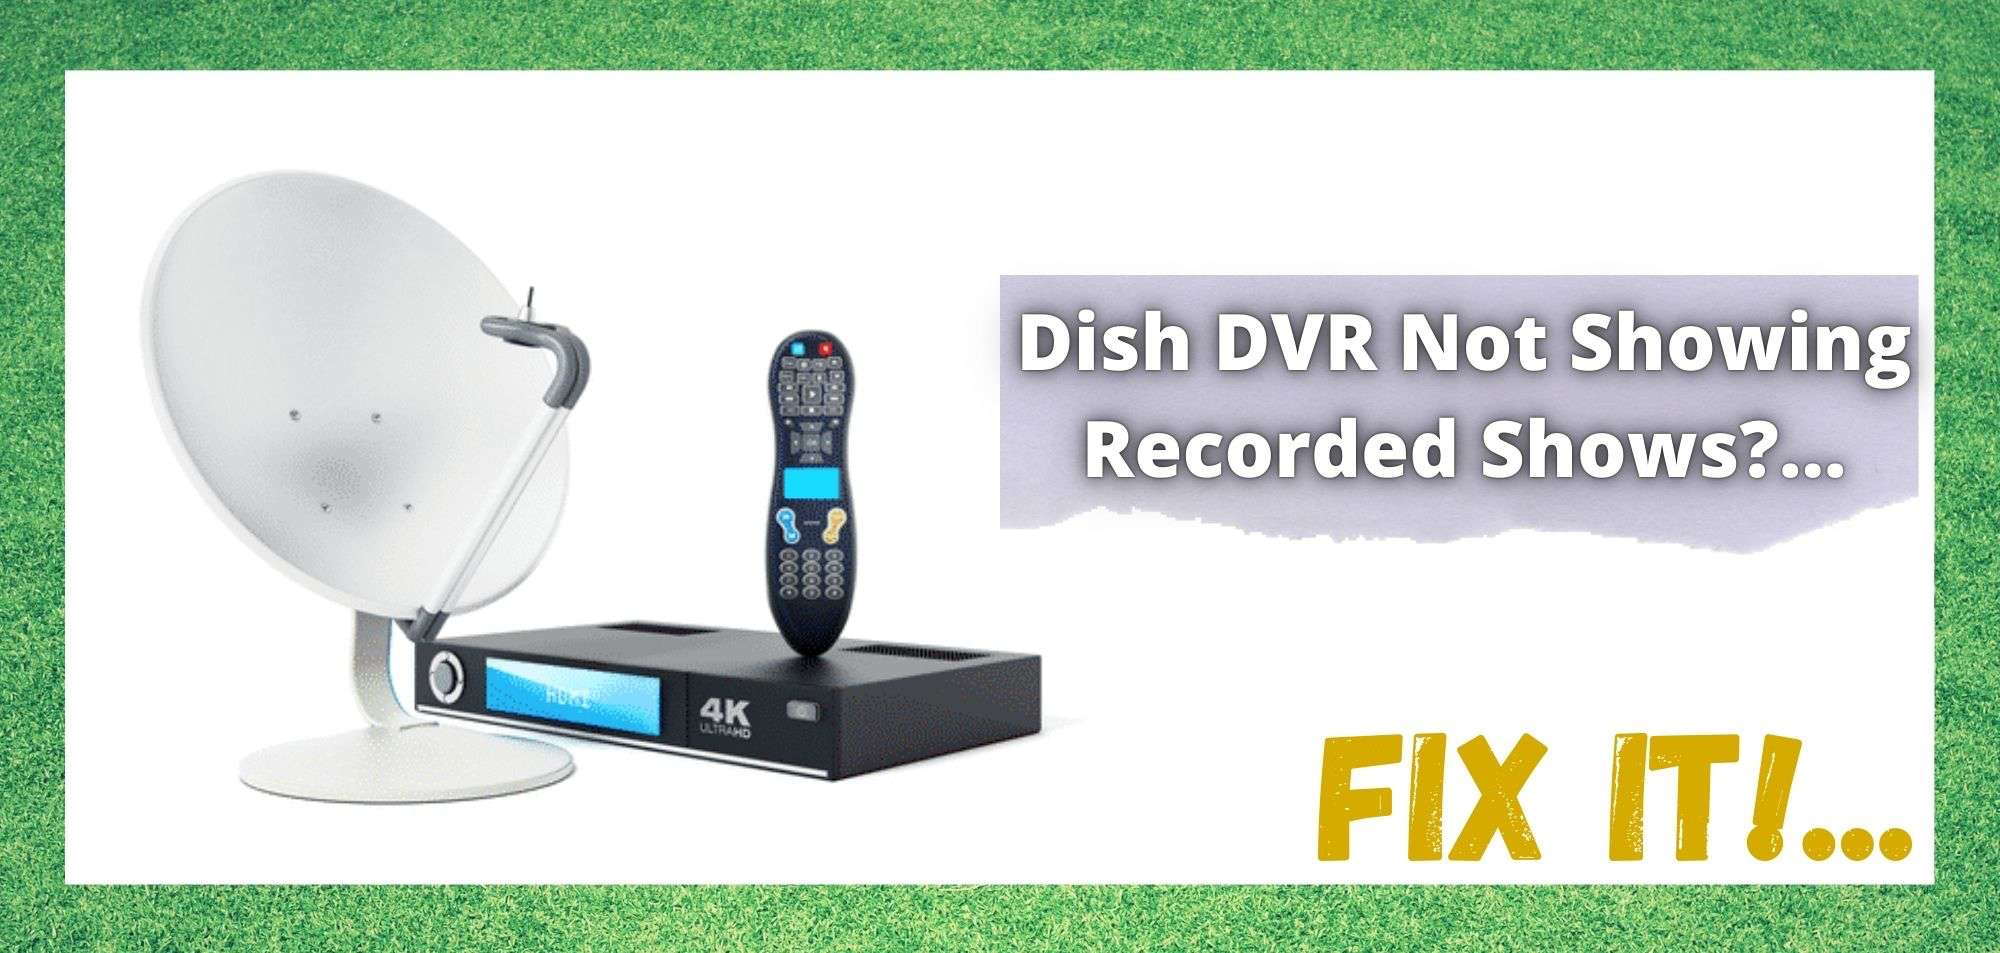 Dish DVR Not Showing Recorded Shows